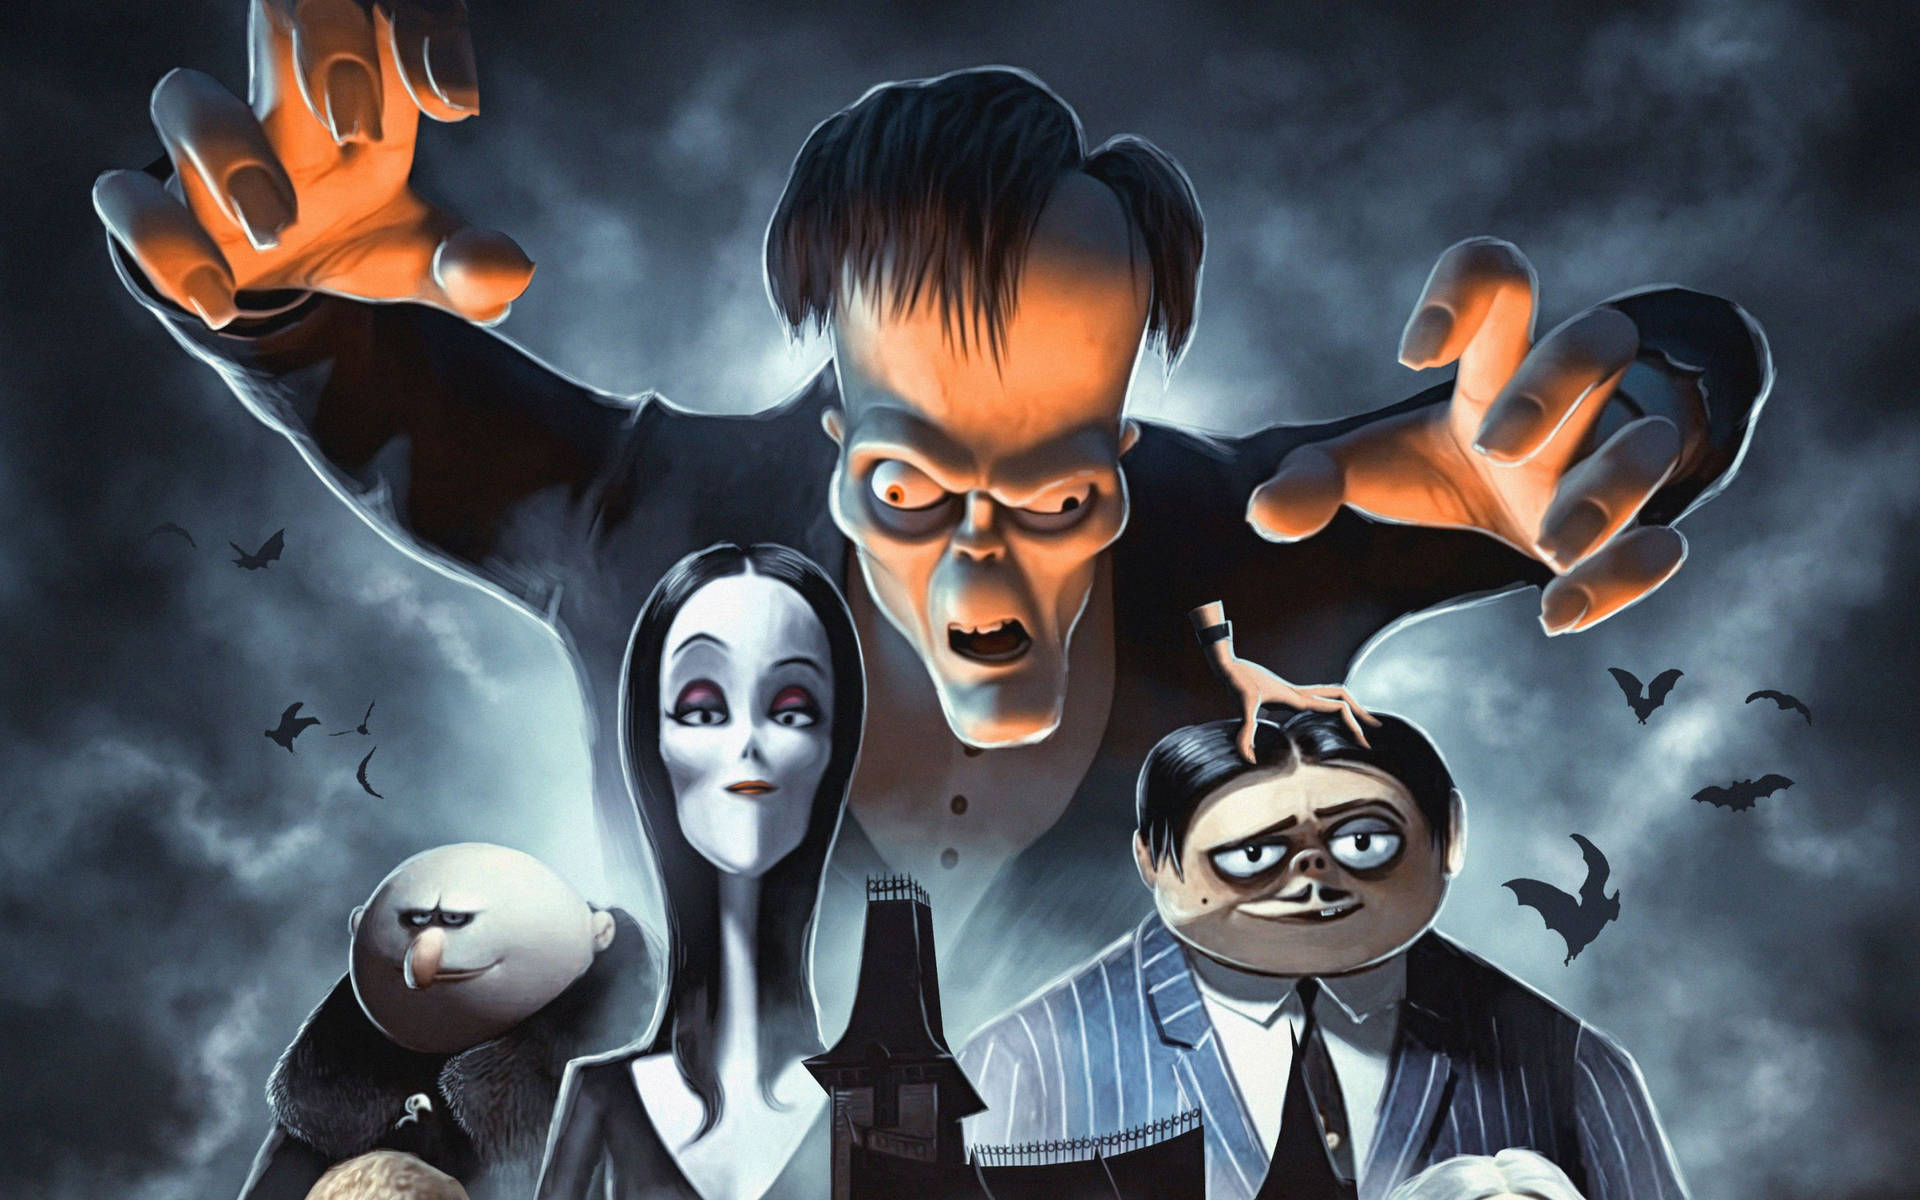 Lurch, the Towering Butler of The Addams Family 2 Wallpaper